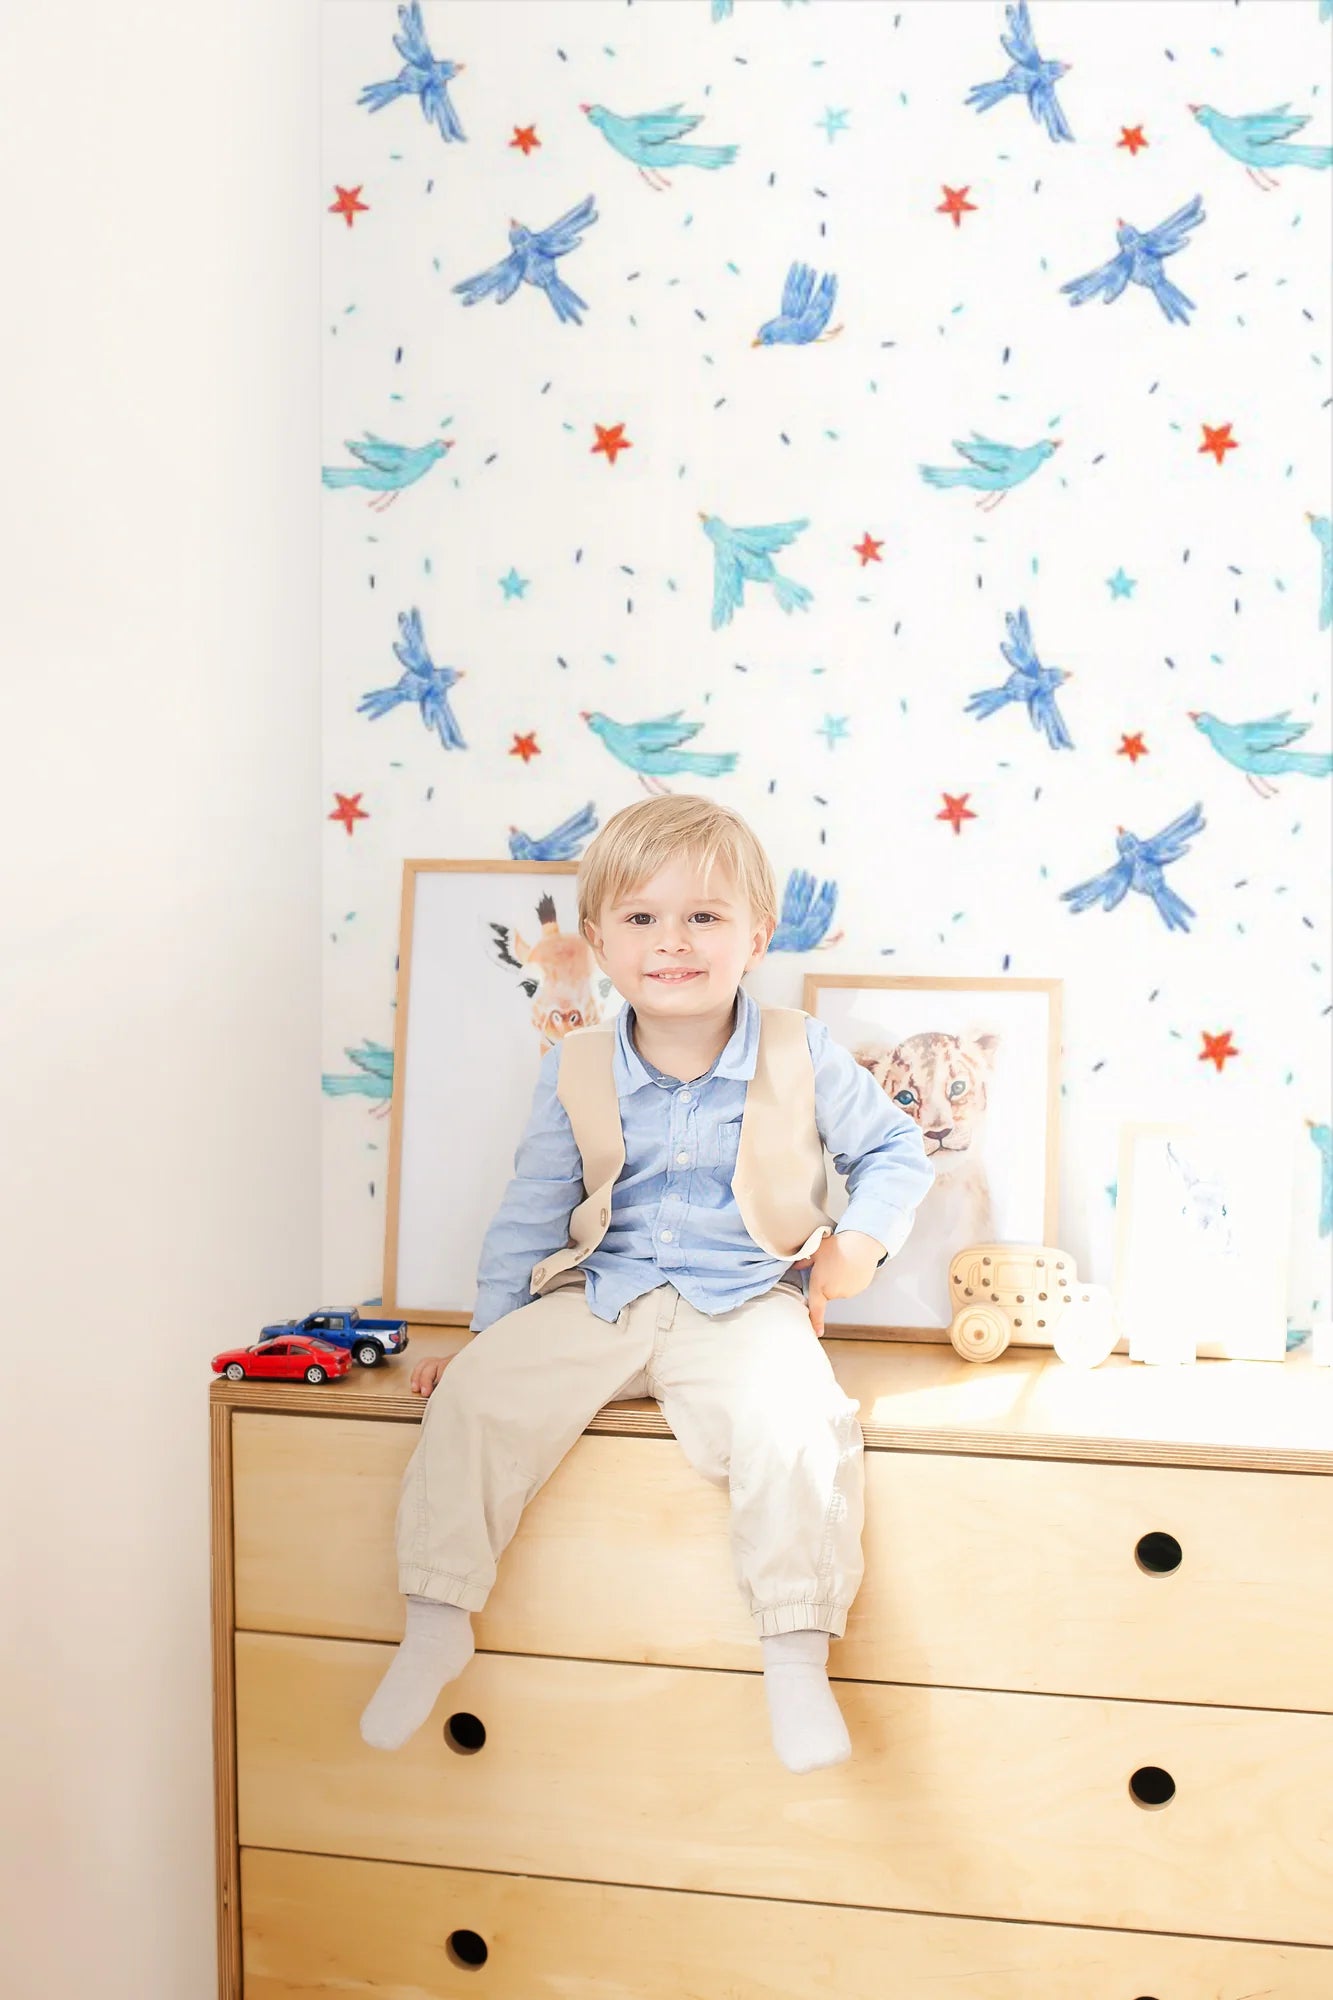 Swallows and Stars, Pattern Wallpaper in boy's room